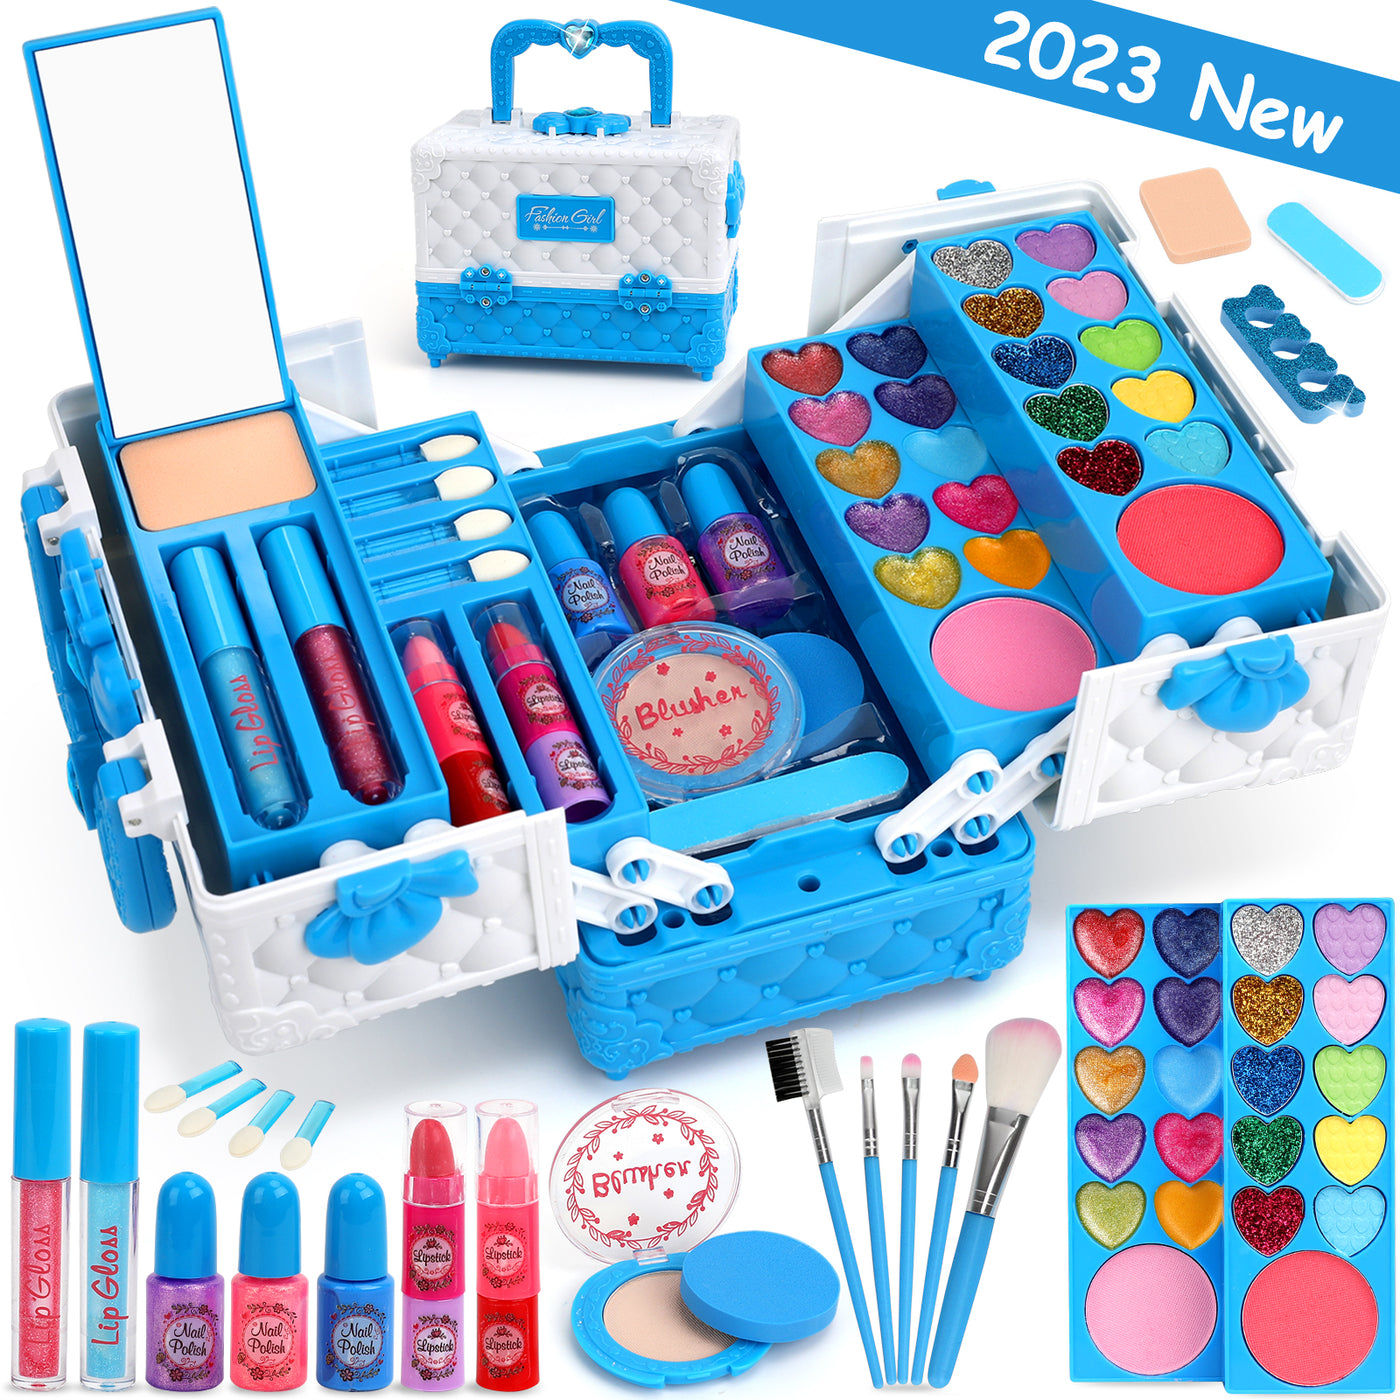 Super Joy Kids Real Makeup Kit for Little Girls:with Blue Dream Bag - Real, Non Toxic, Washable Make Up Dress Up Toy - Gift for Toddler Young Children Pretend